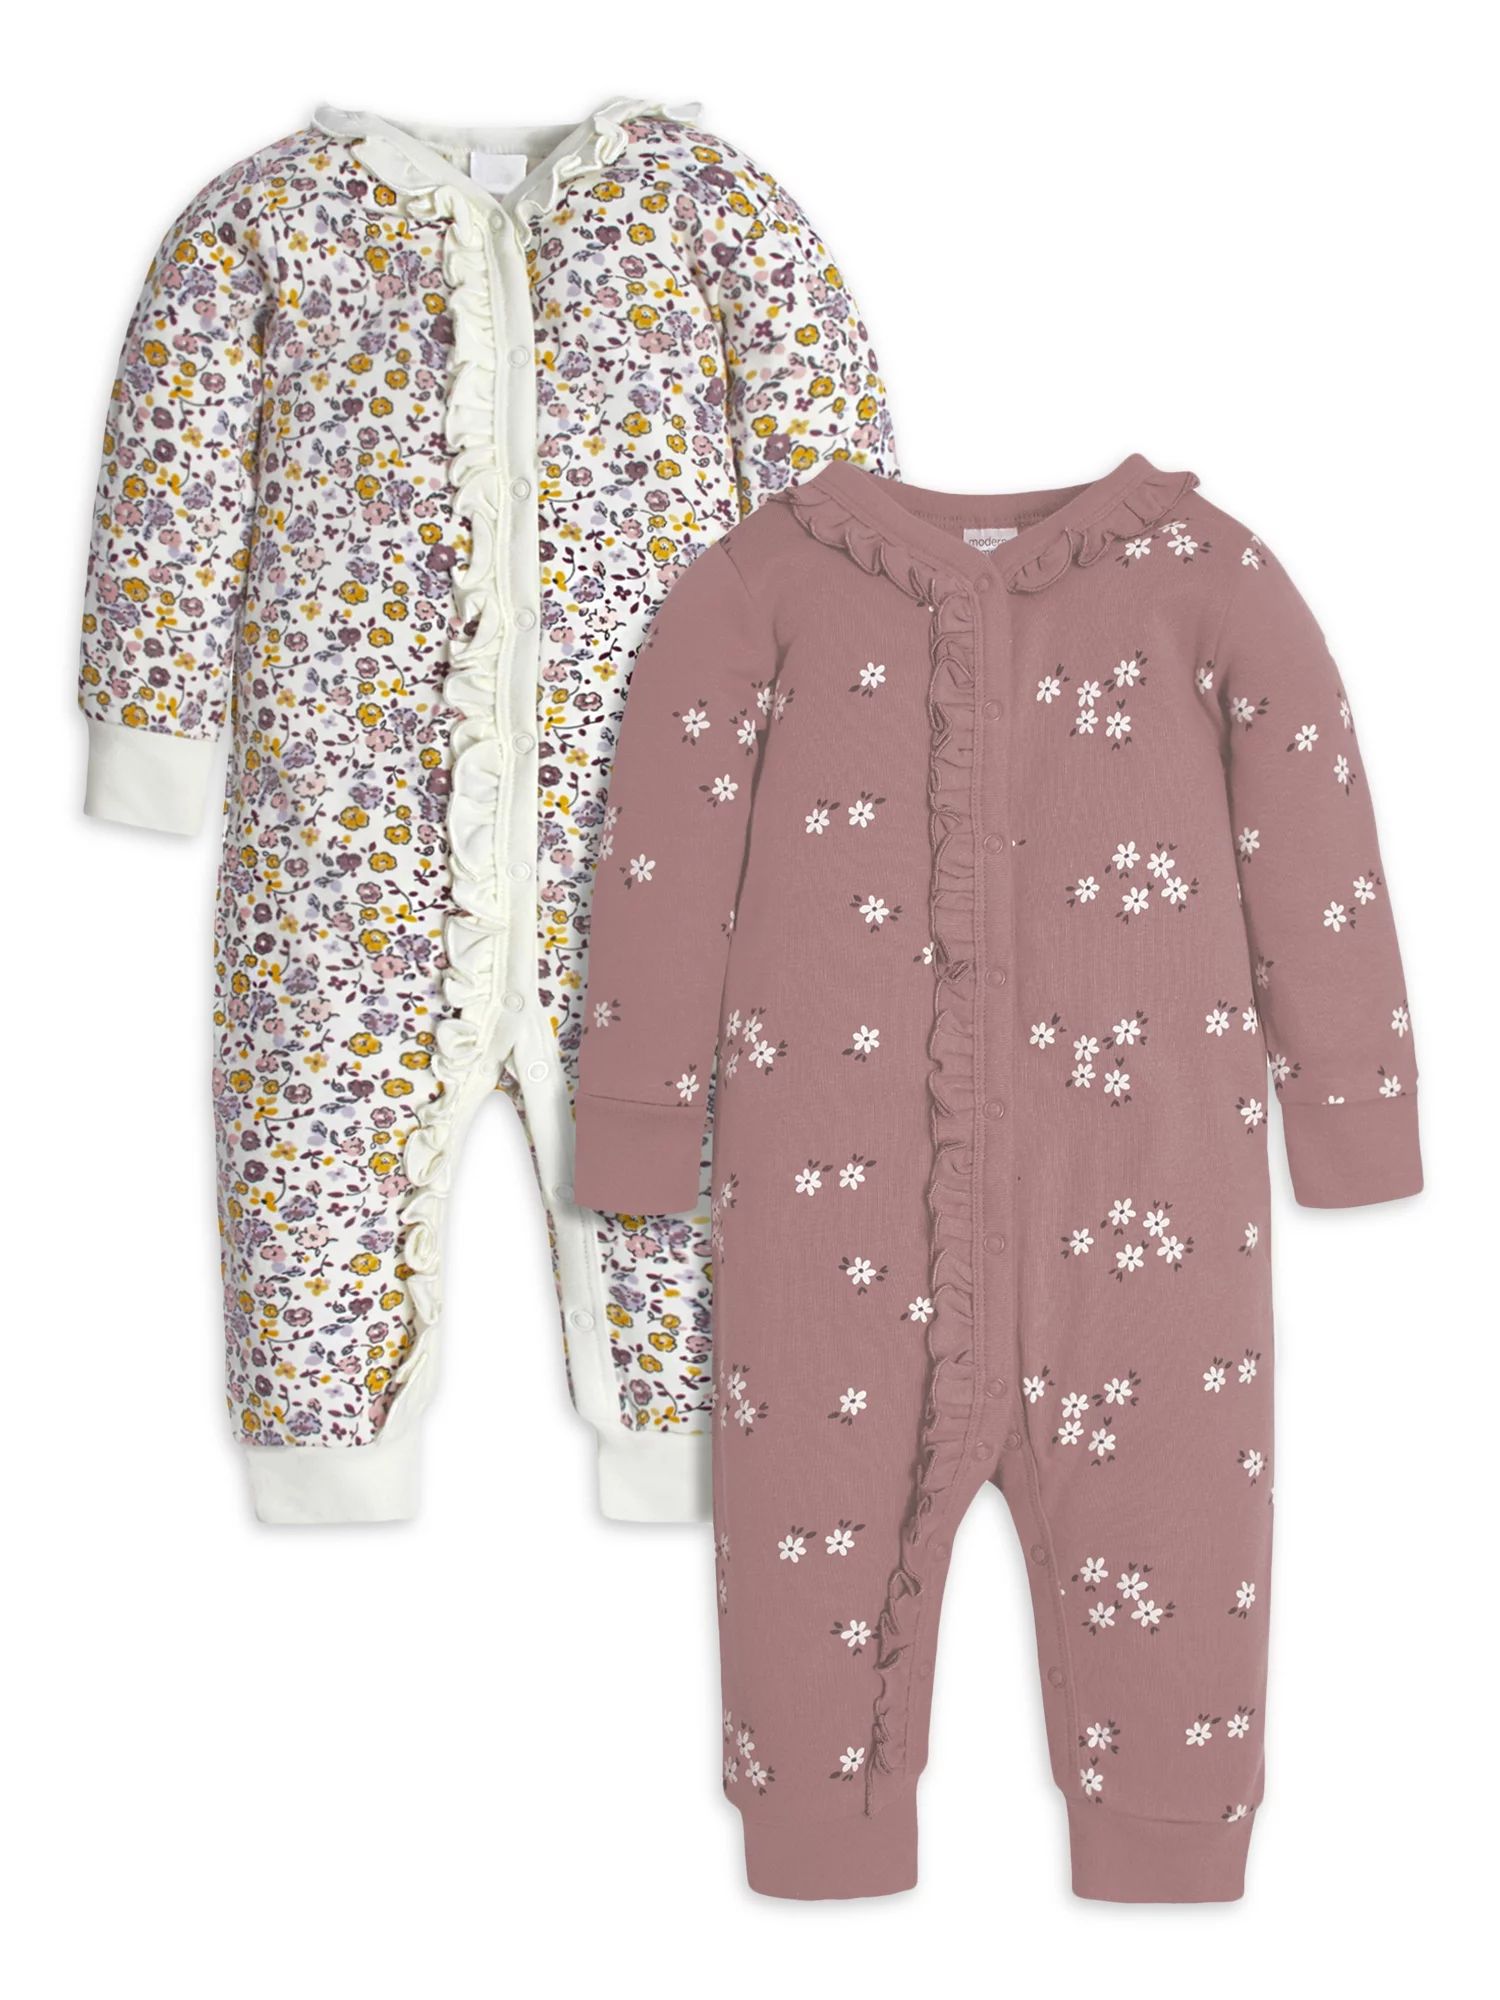 Modern Moments by Gerber Baby Girl Coveralls, 2-Pack (Newborn - 12M) | Walmart (US)